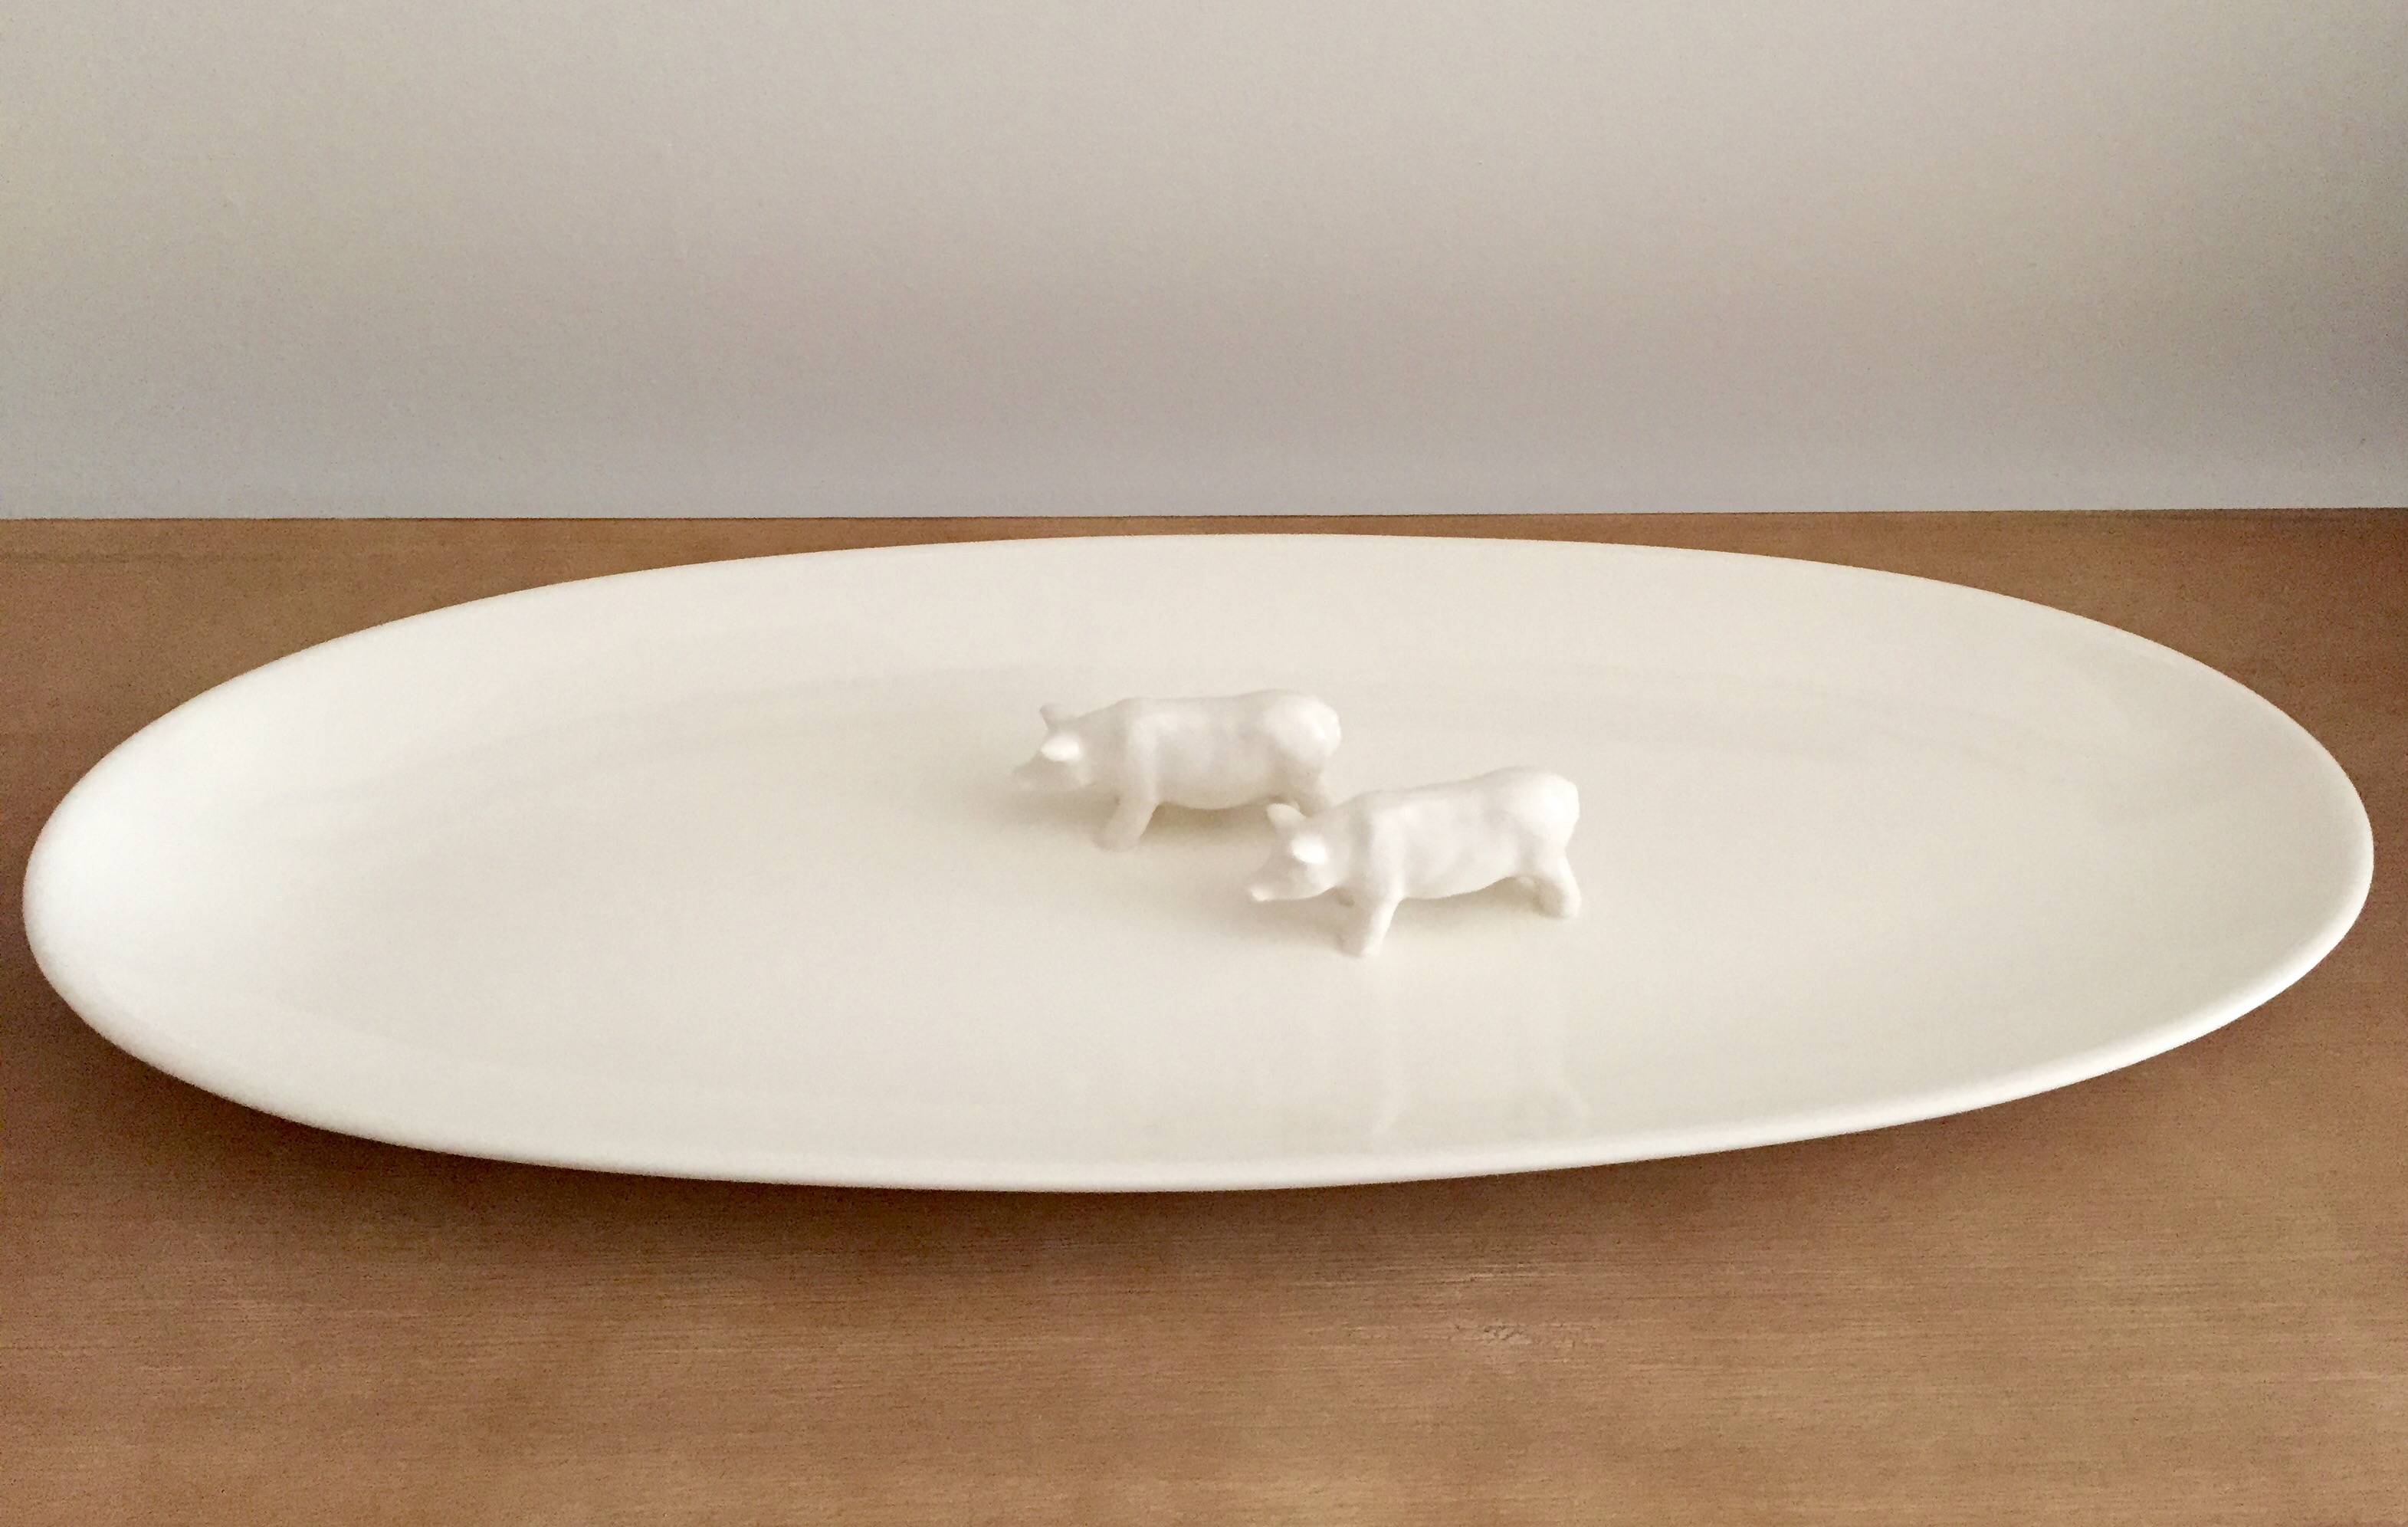 Long ceramic plate with pigs